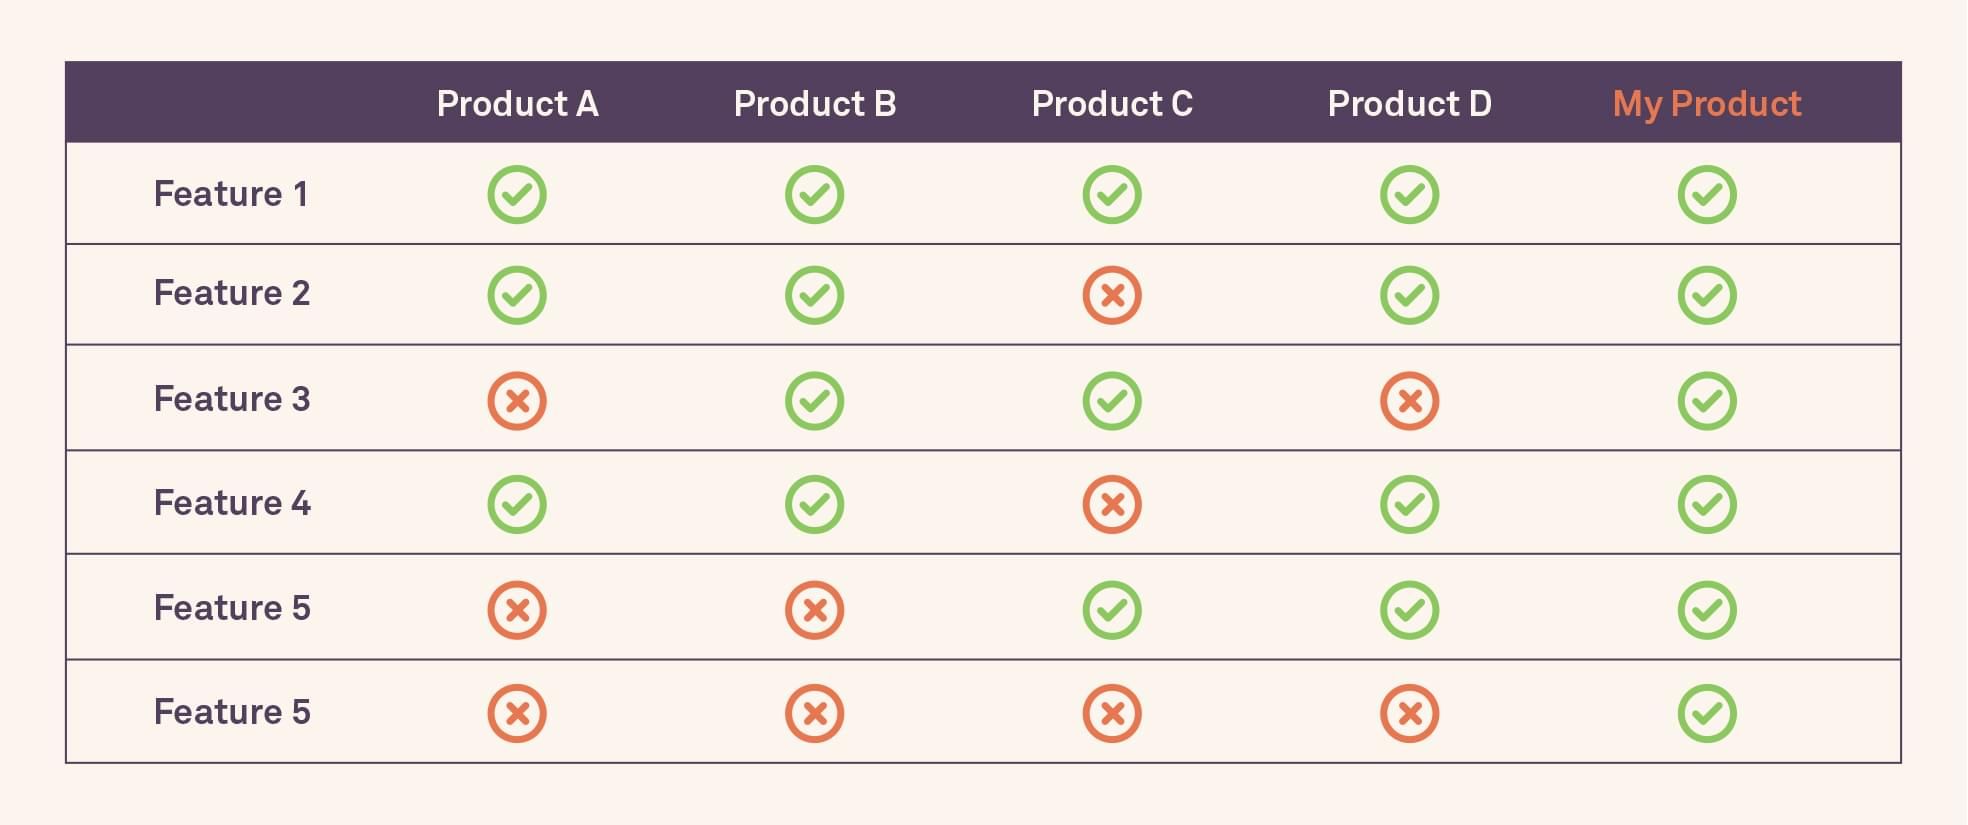 Don't rely on a feature matrix to make your sales pitch